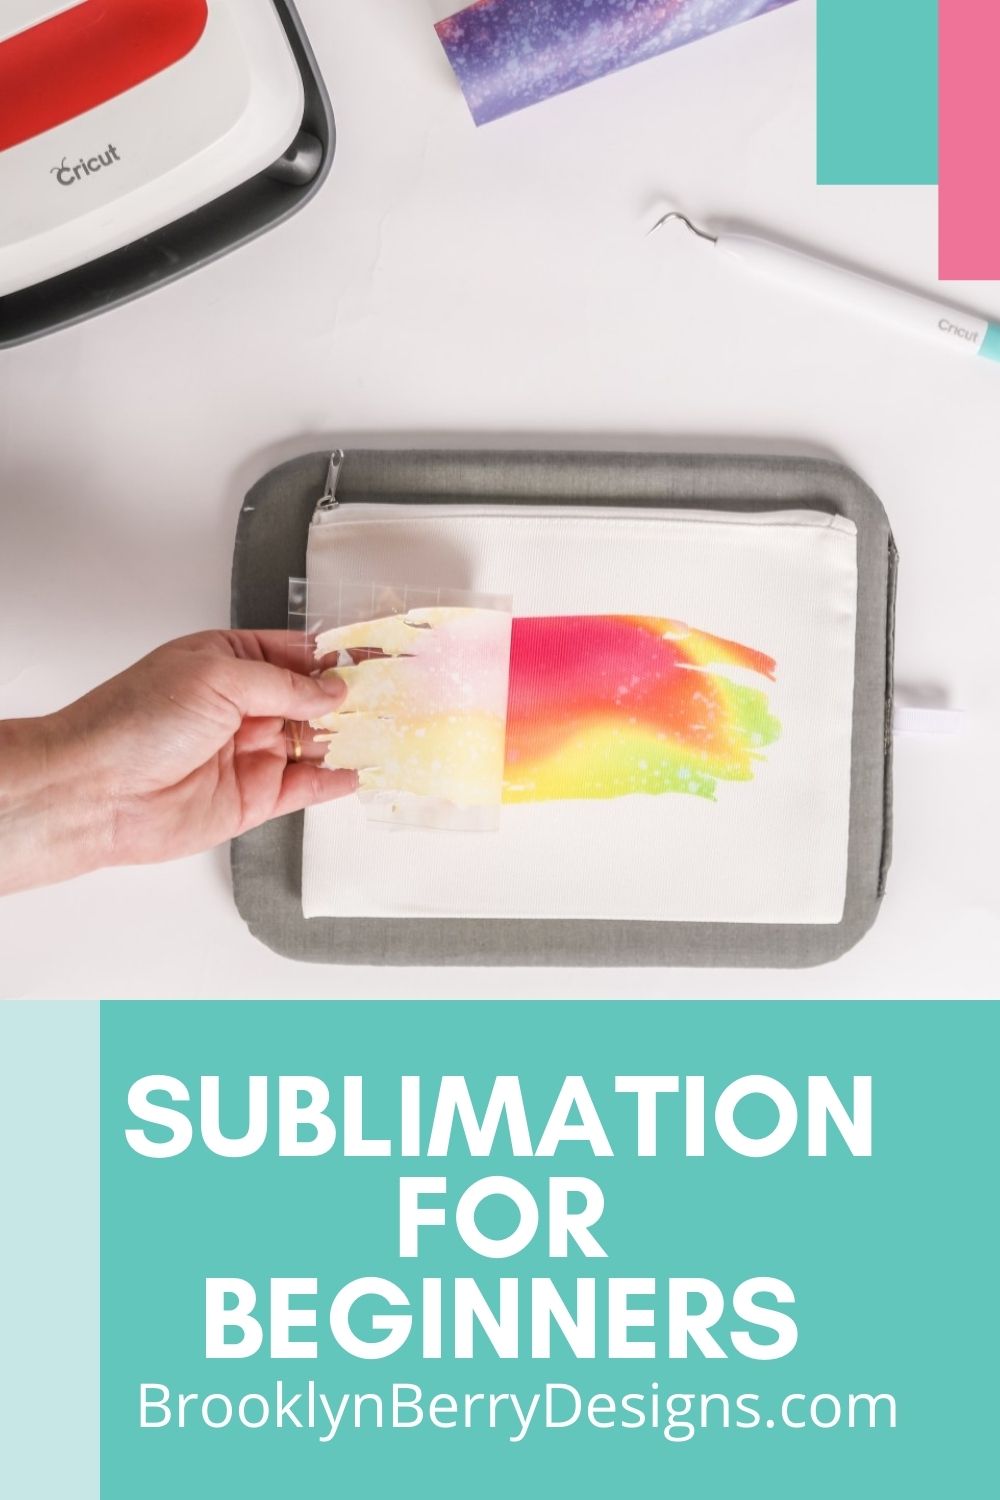 Sublimation for Beginners via @brookeberry